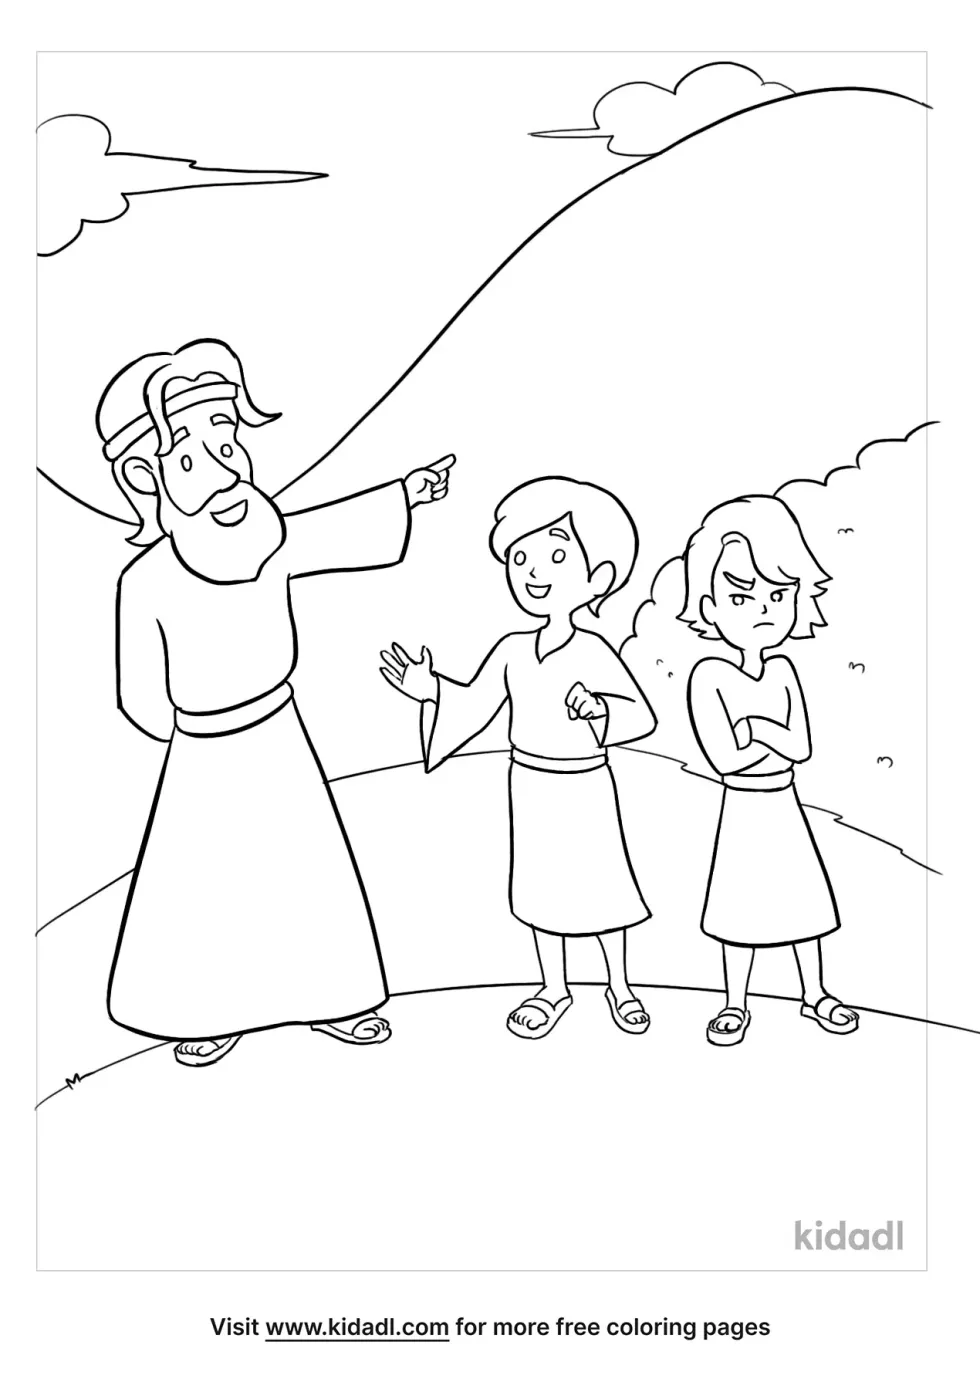 Parable Of Two Sons Coloring Page